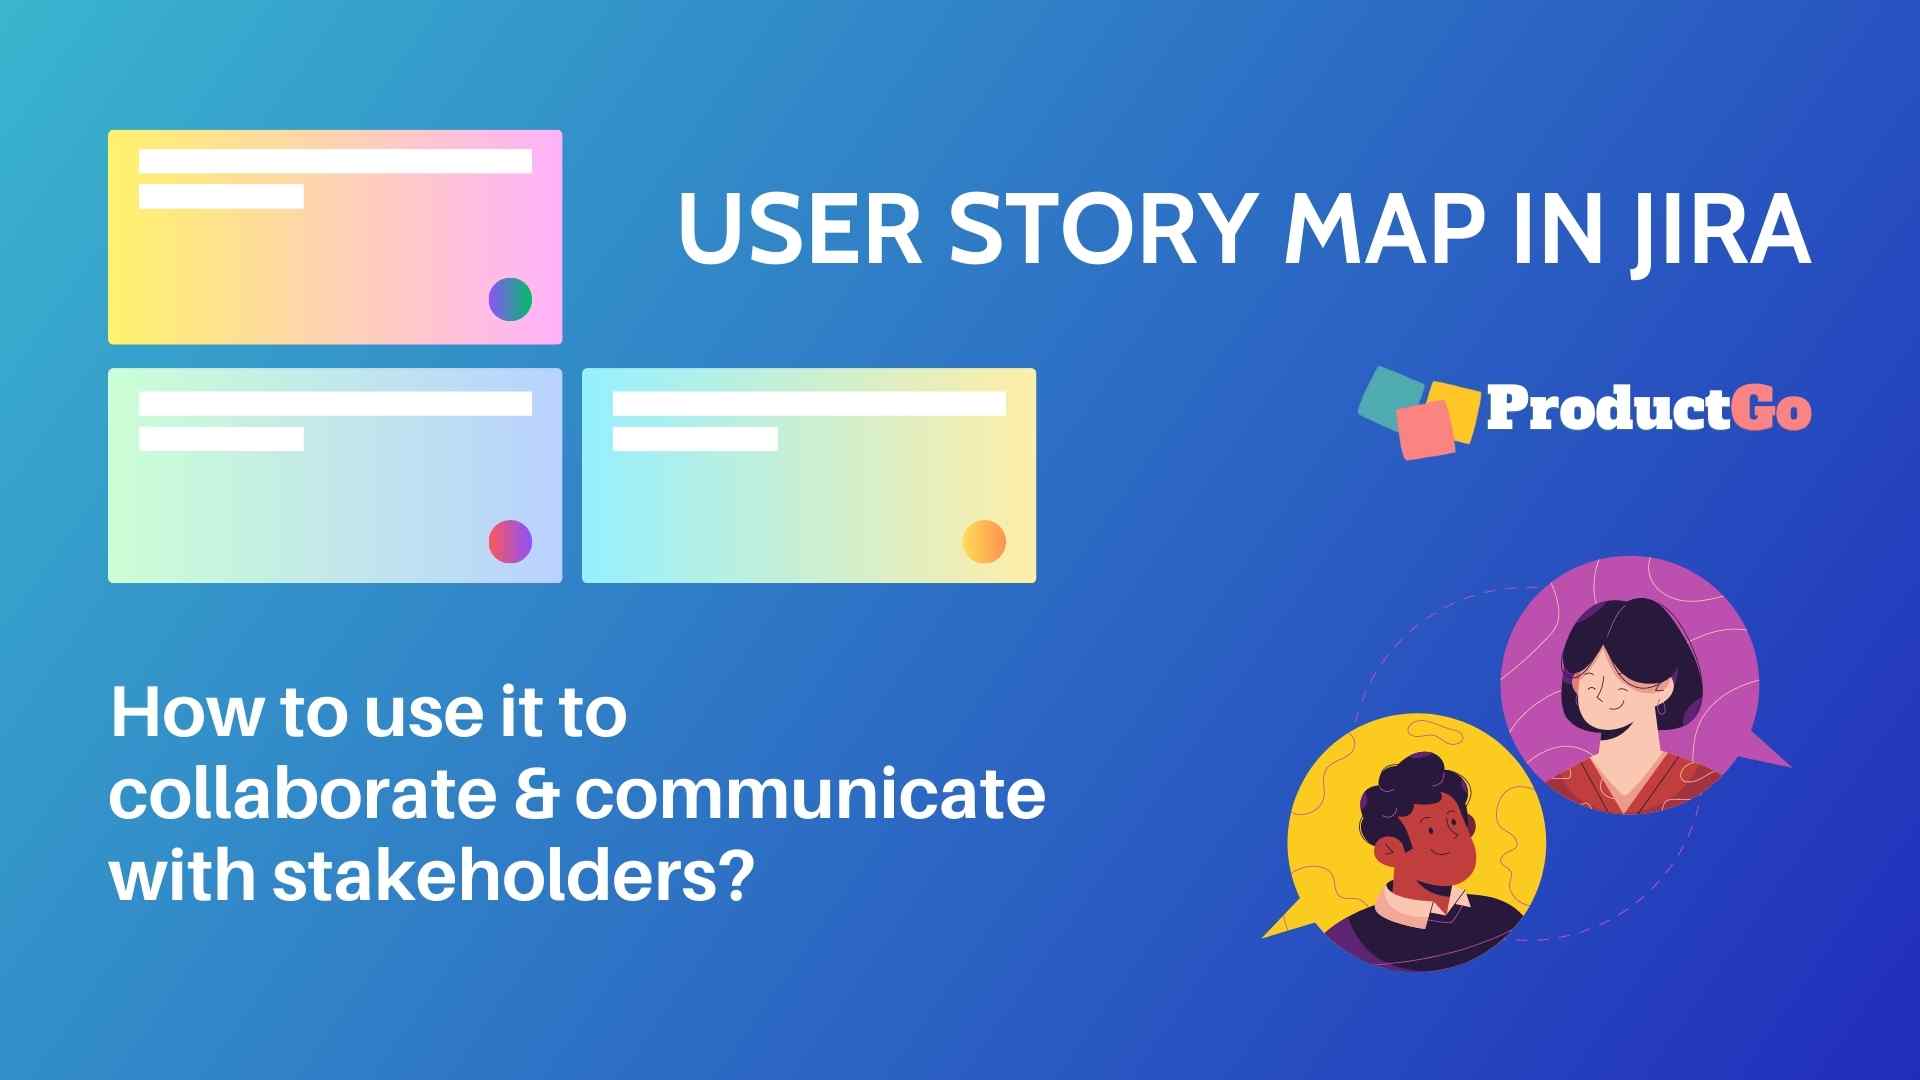 User Story Map in Jira _ How to use it to collaborate & communicate with stakeholders